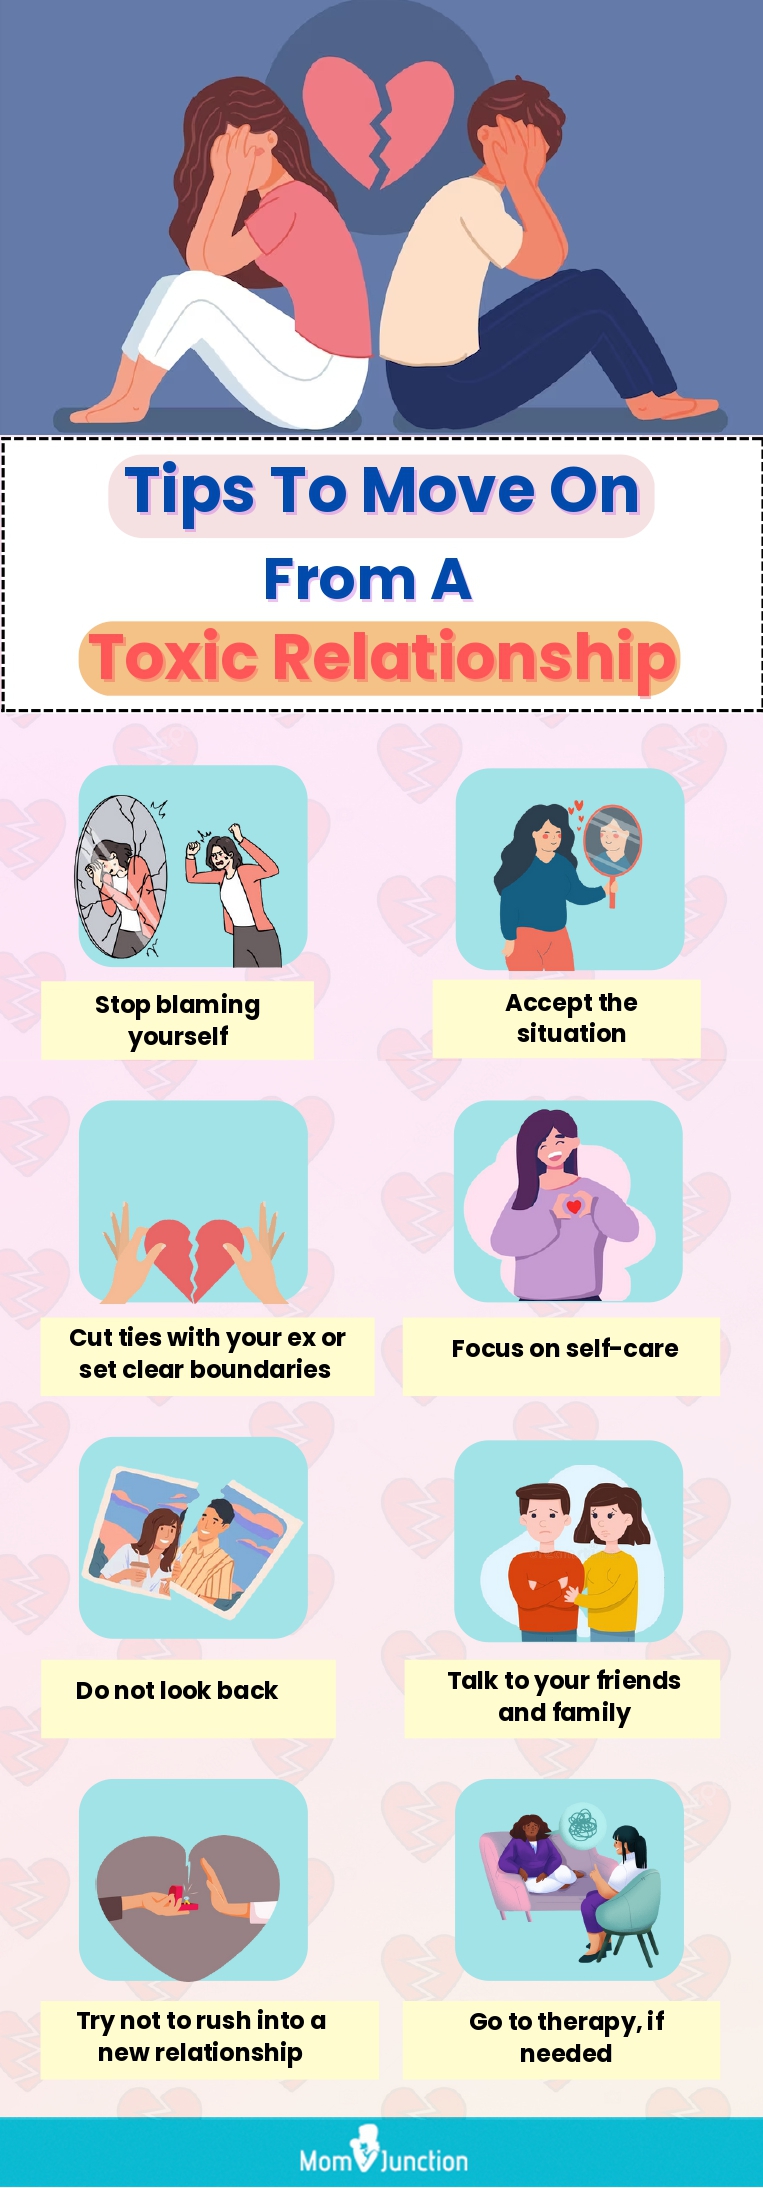 tips to move on from a toxic relationship (infographic)